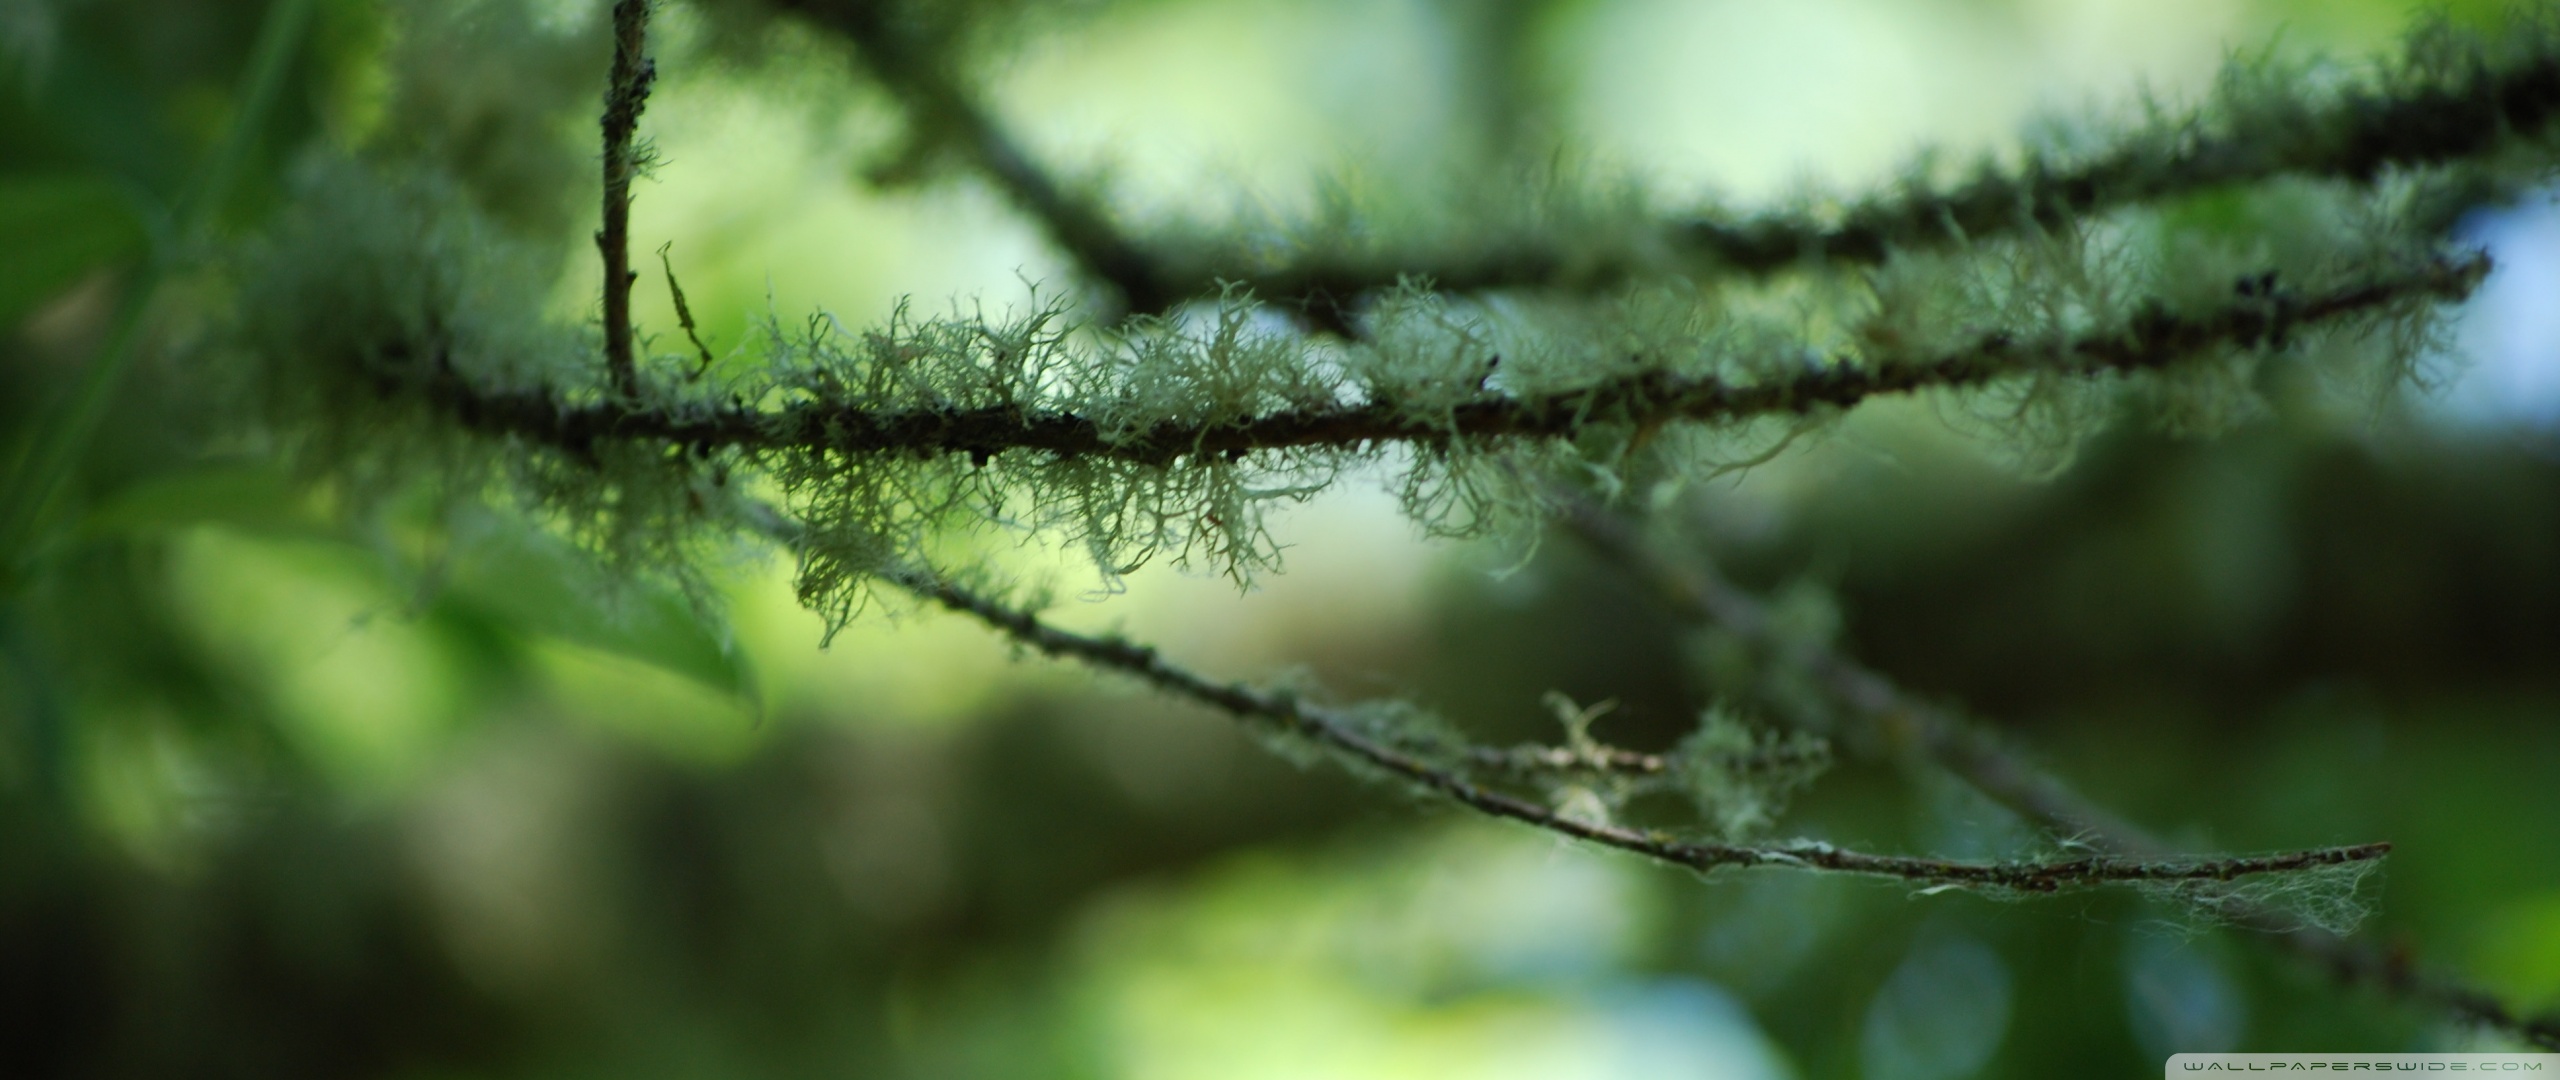 Mossy Branches Ultra HD Desktop Background Wallpaper for 4K UHD TV